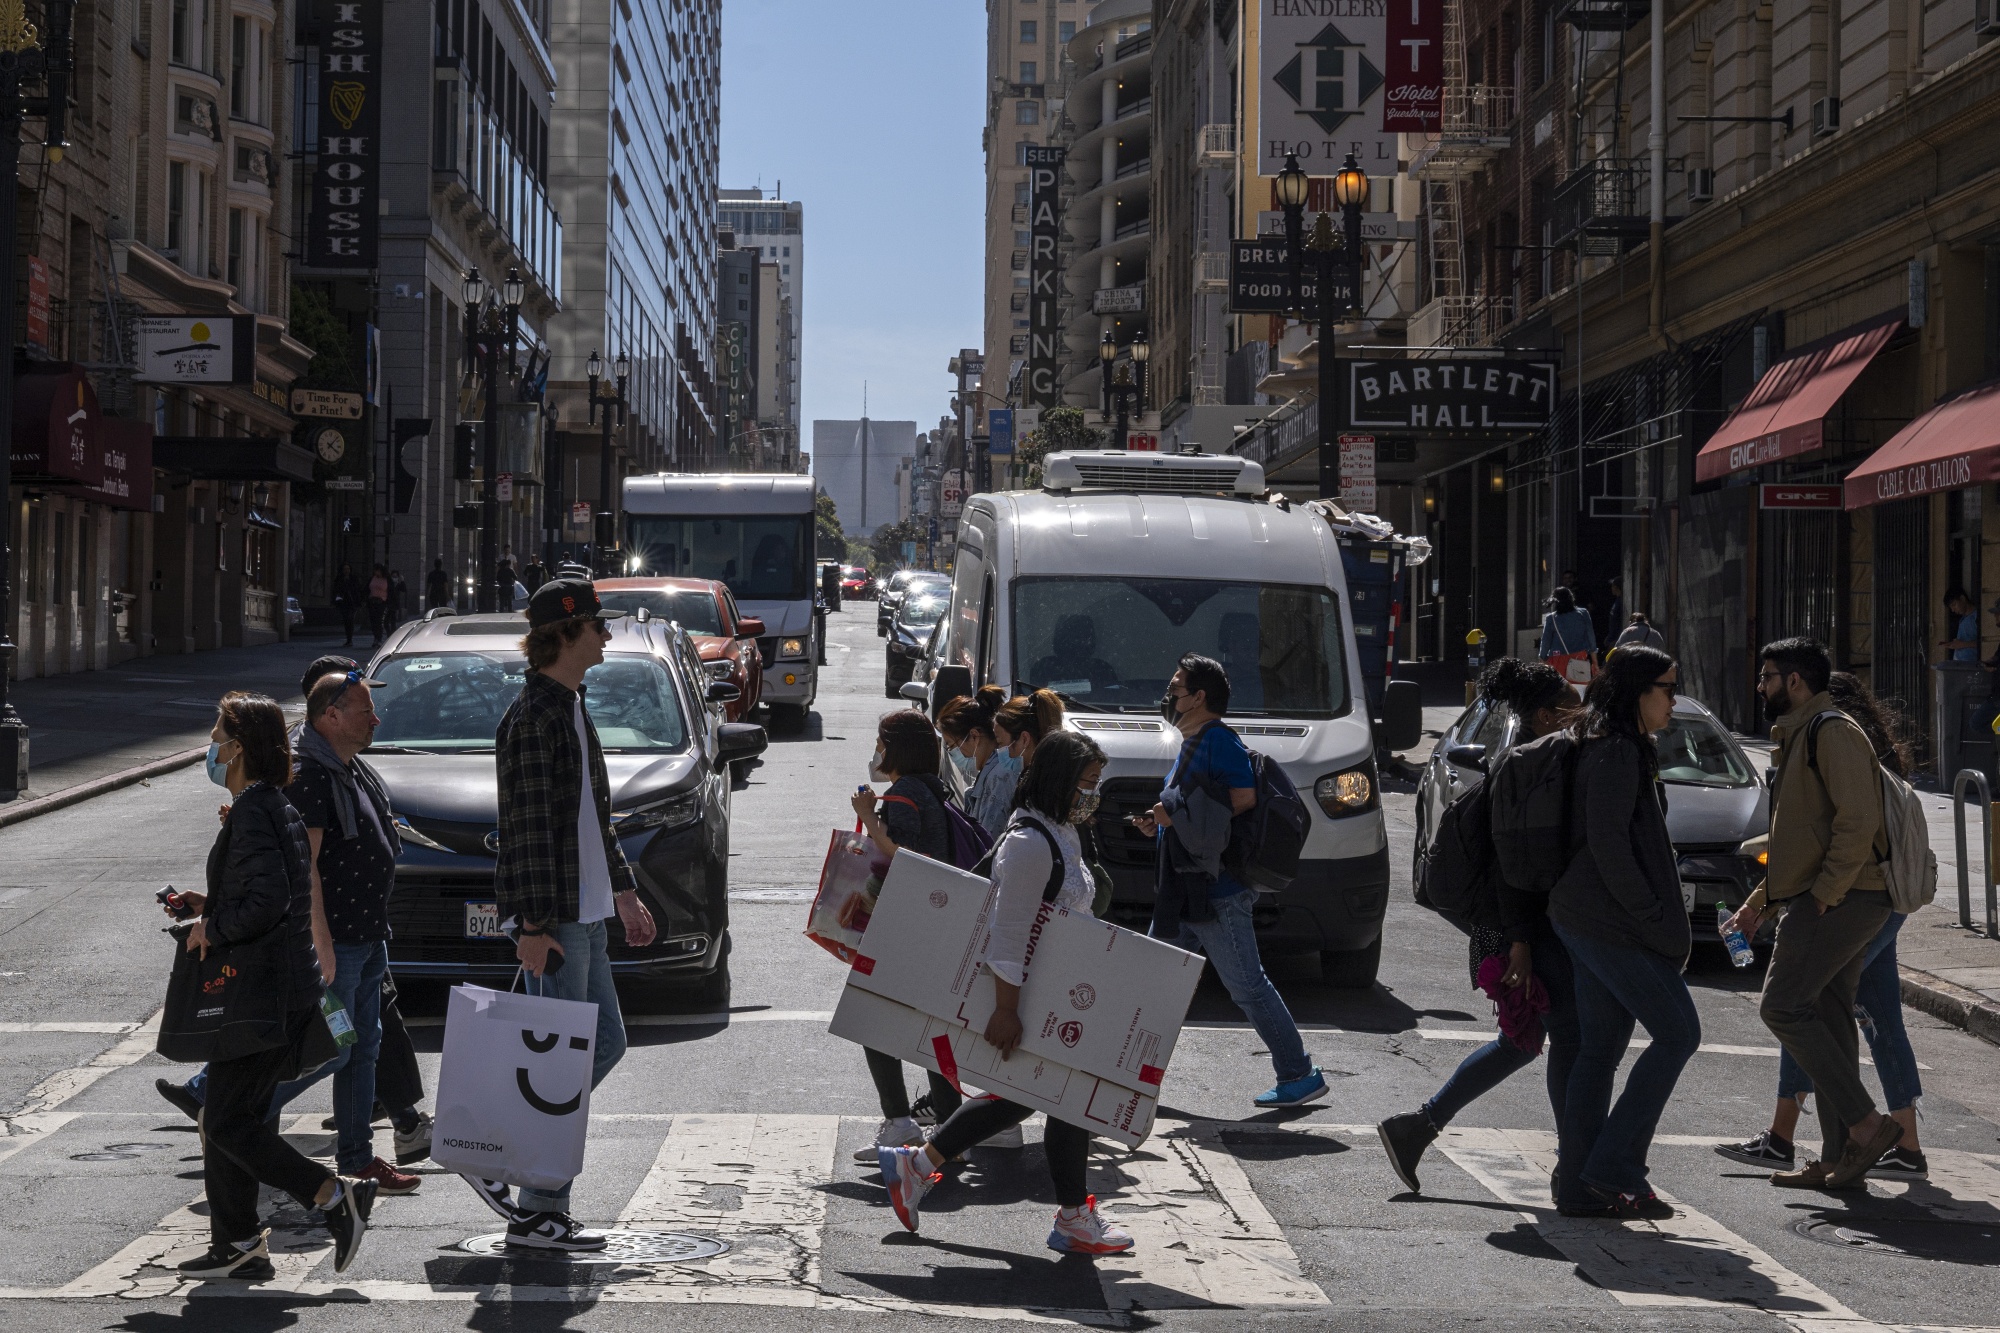 Pedestrians carry shopping bags on Powell Street in San Francisco.